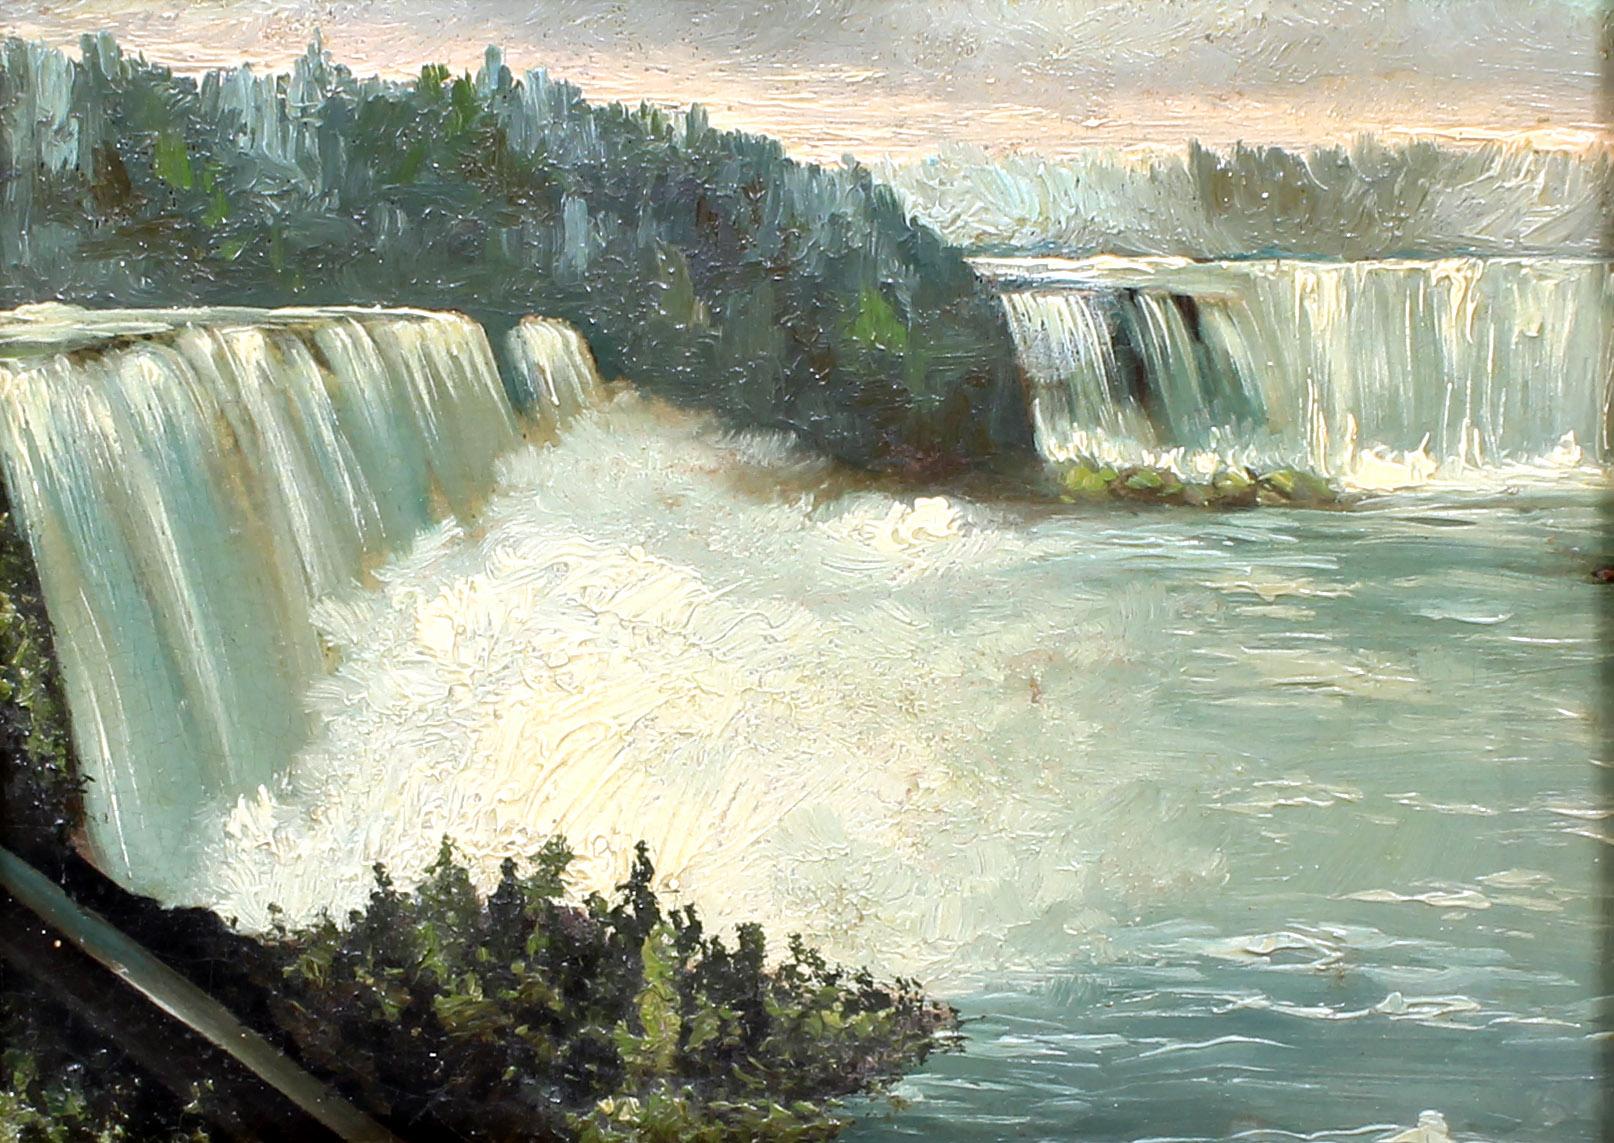 Antique American Niagara Falls painting. Gorgeous pink hues in the late afternoon illuminate the Falls making a wonderful and sought after subject.